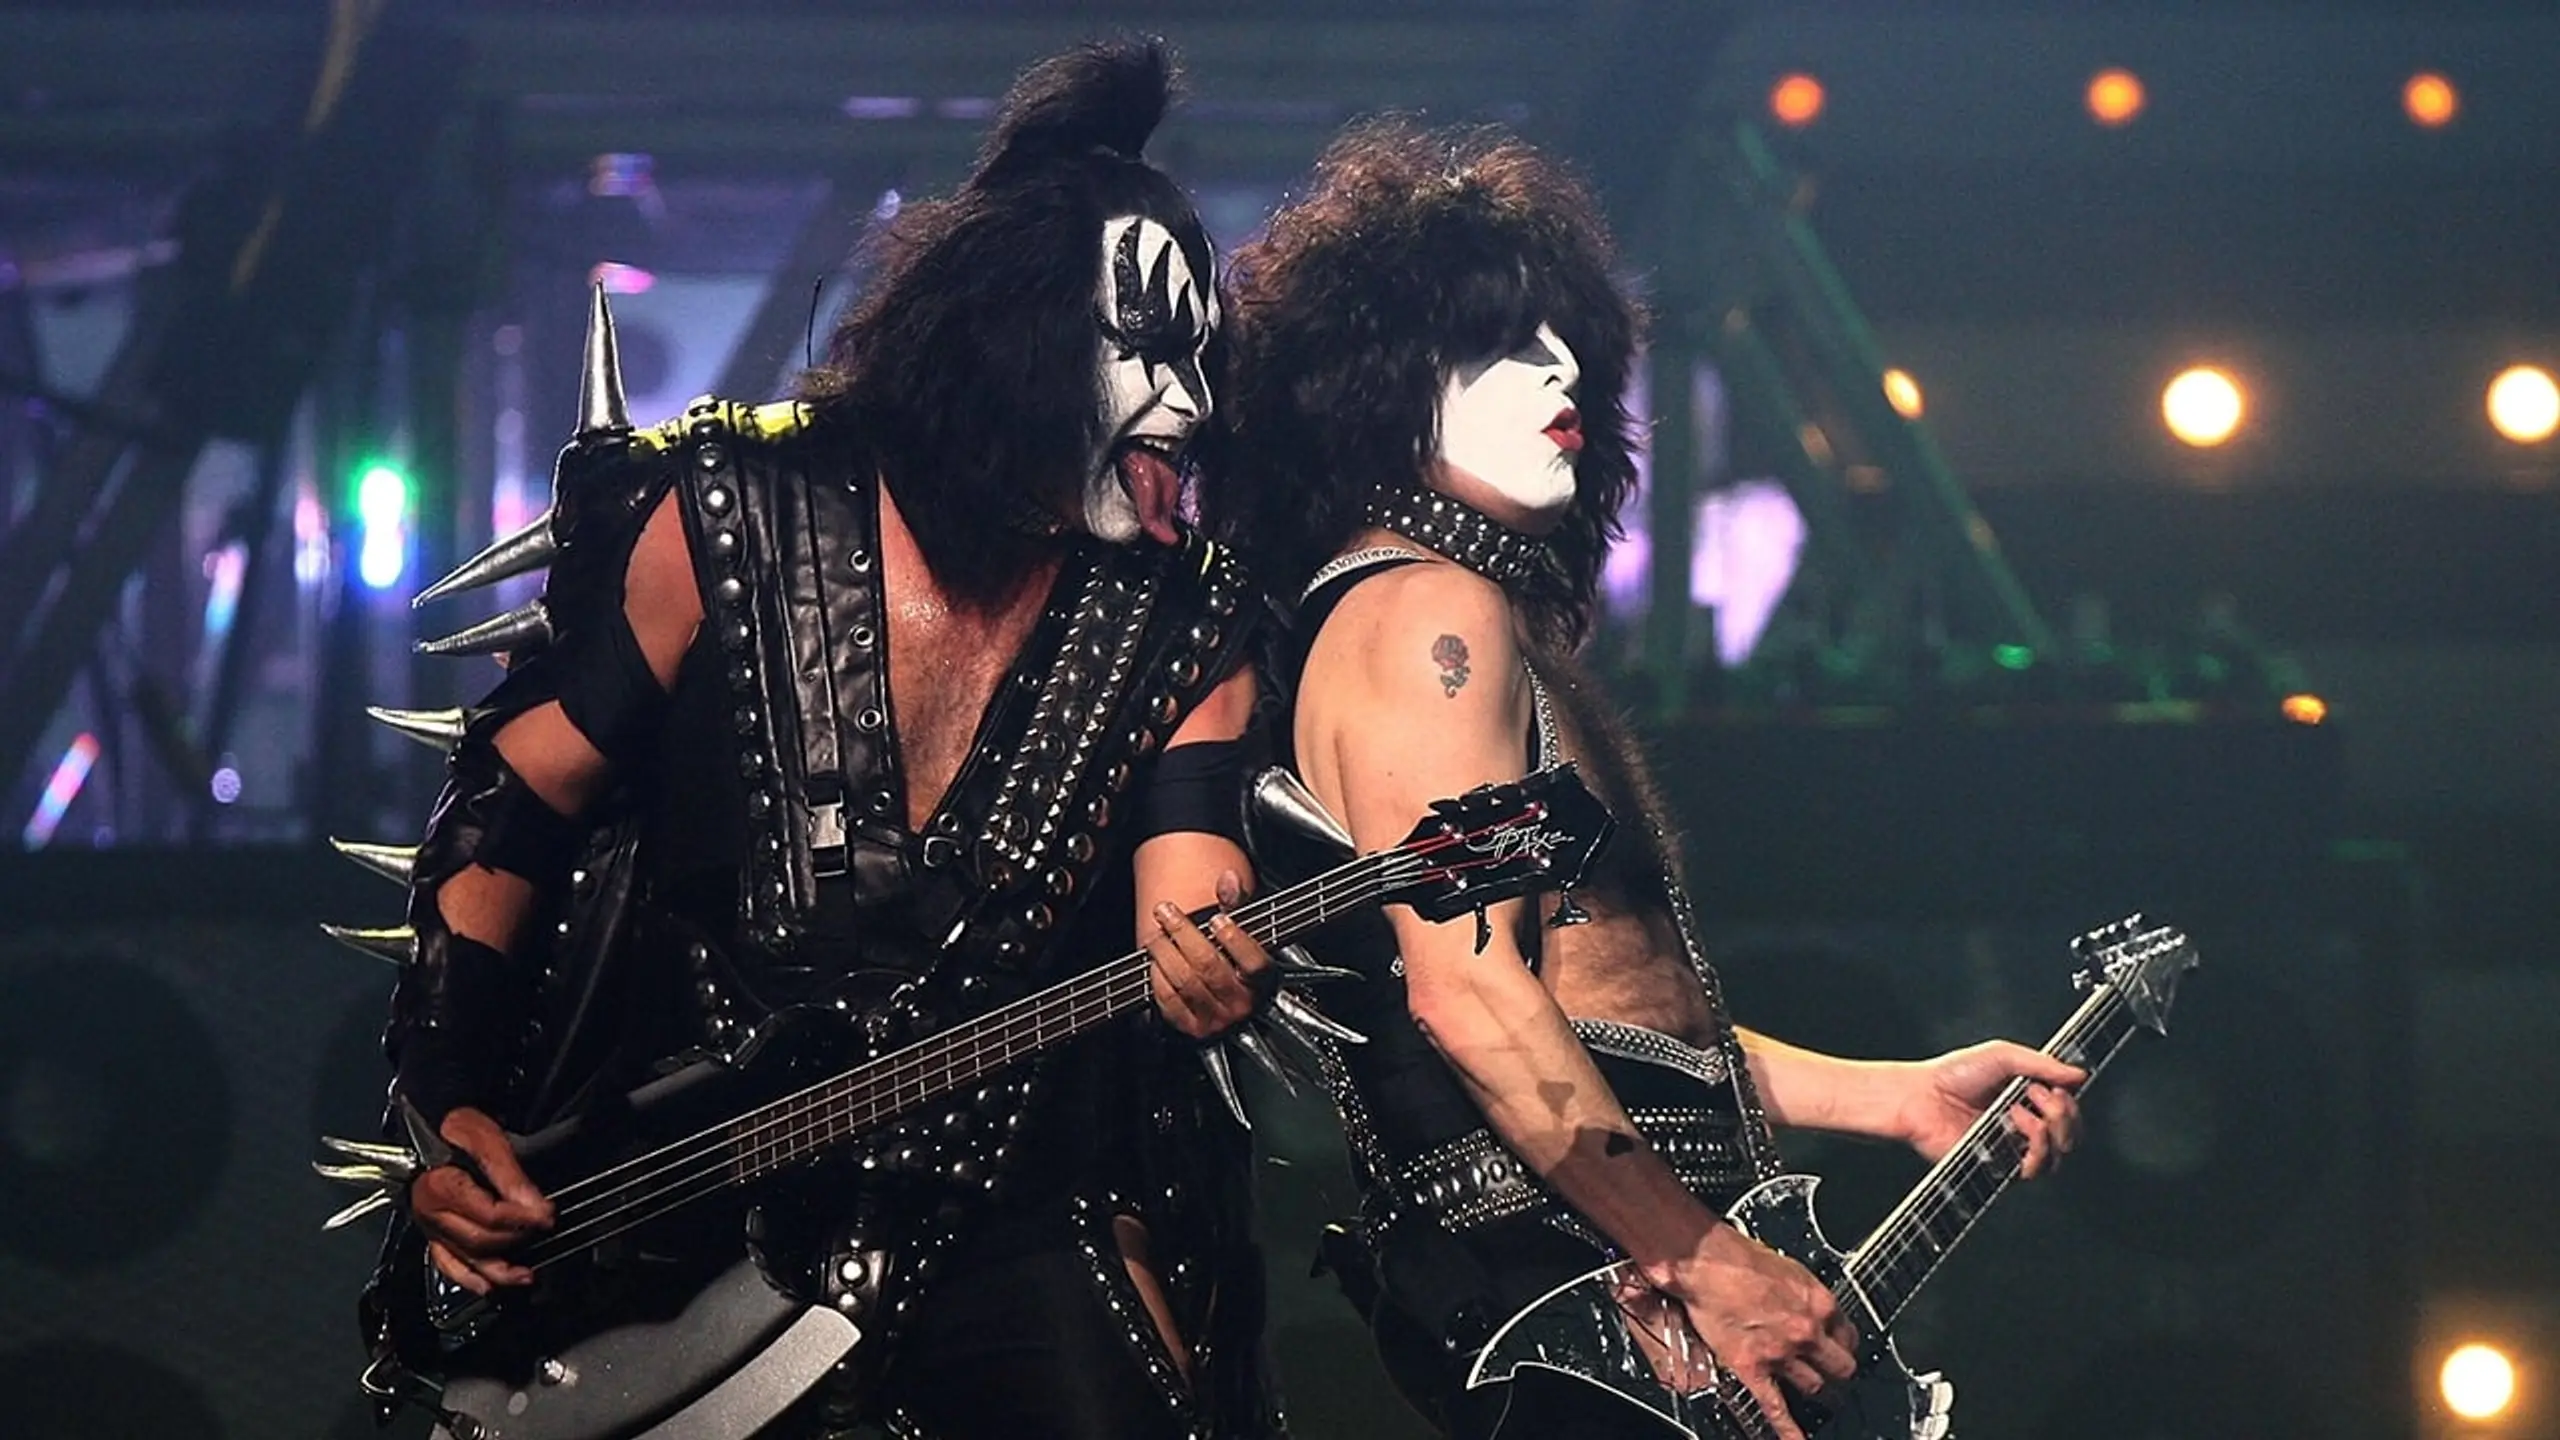 KISS Frontmen: Gene Simmons and Paul Stanley